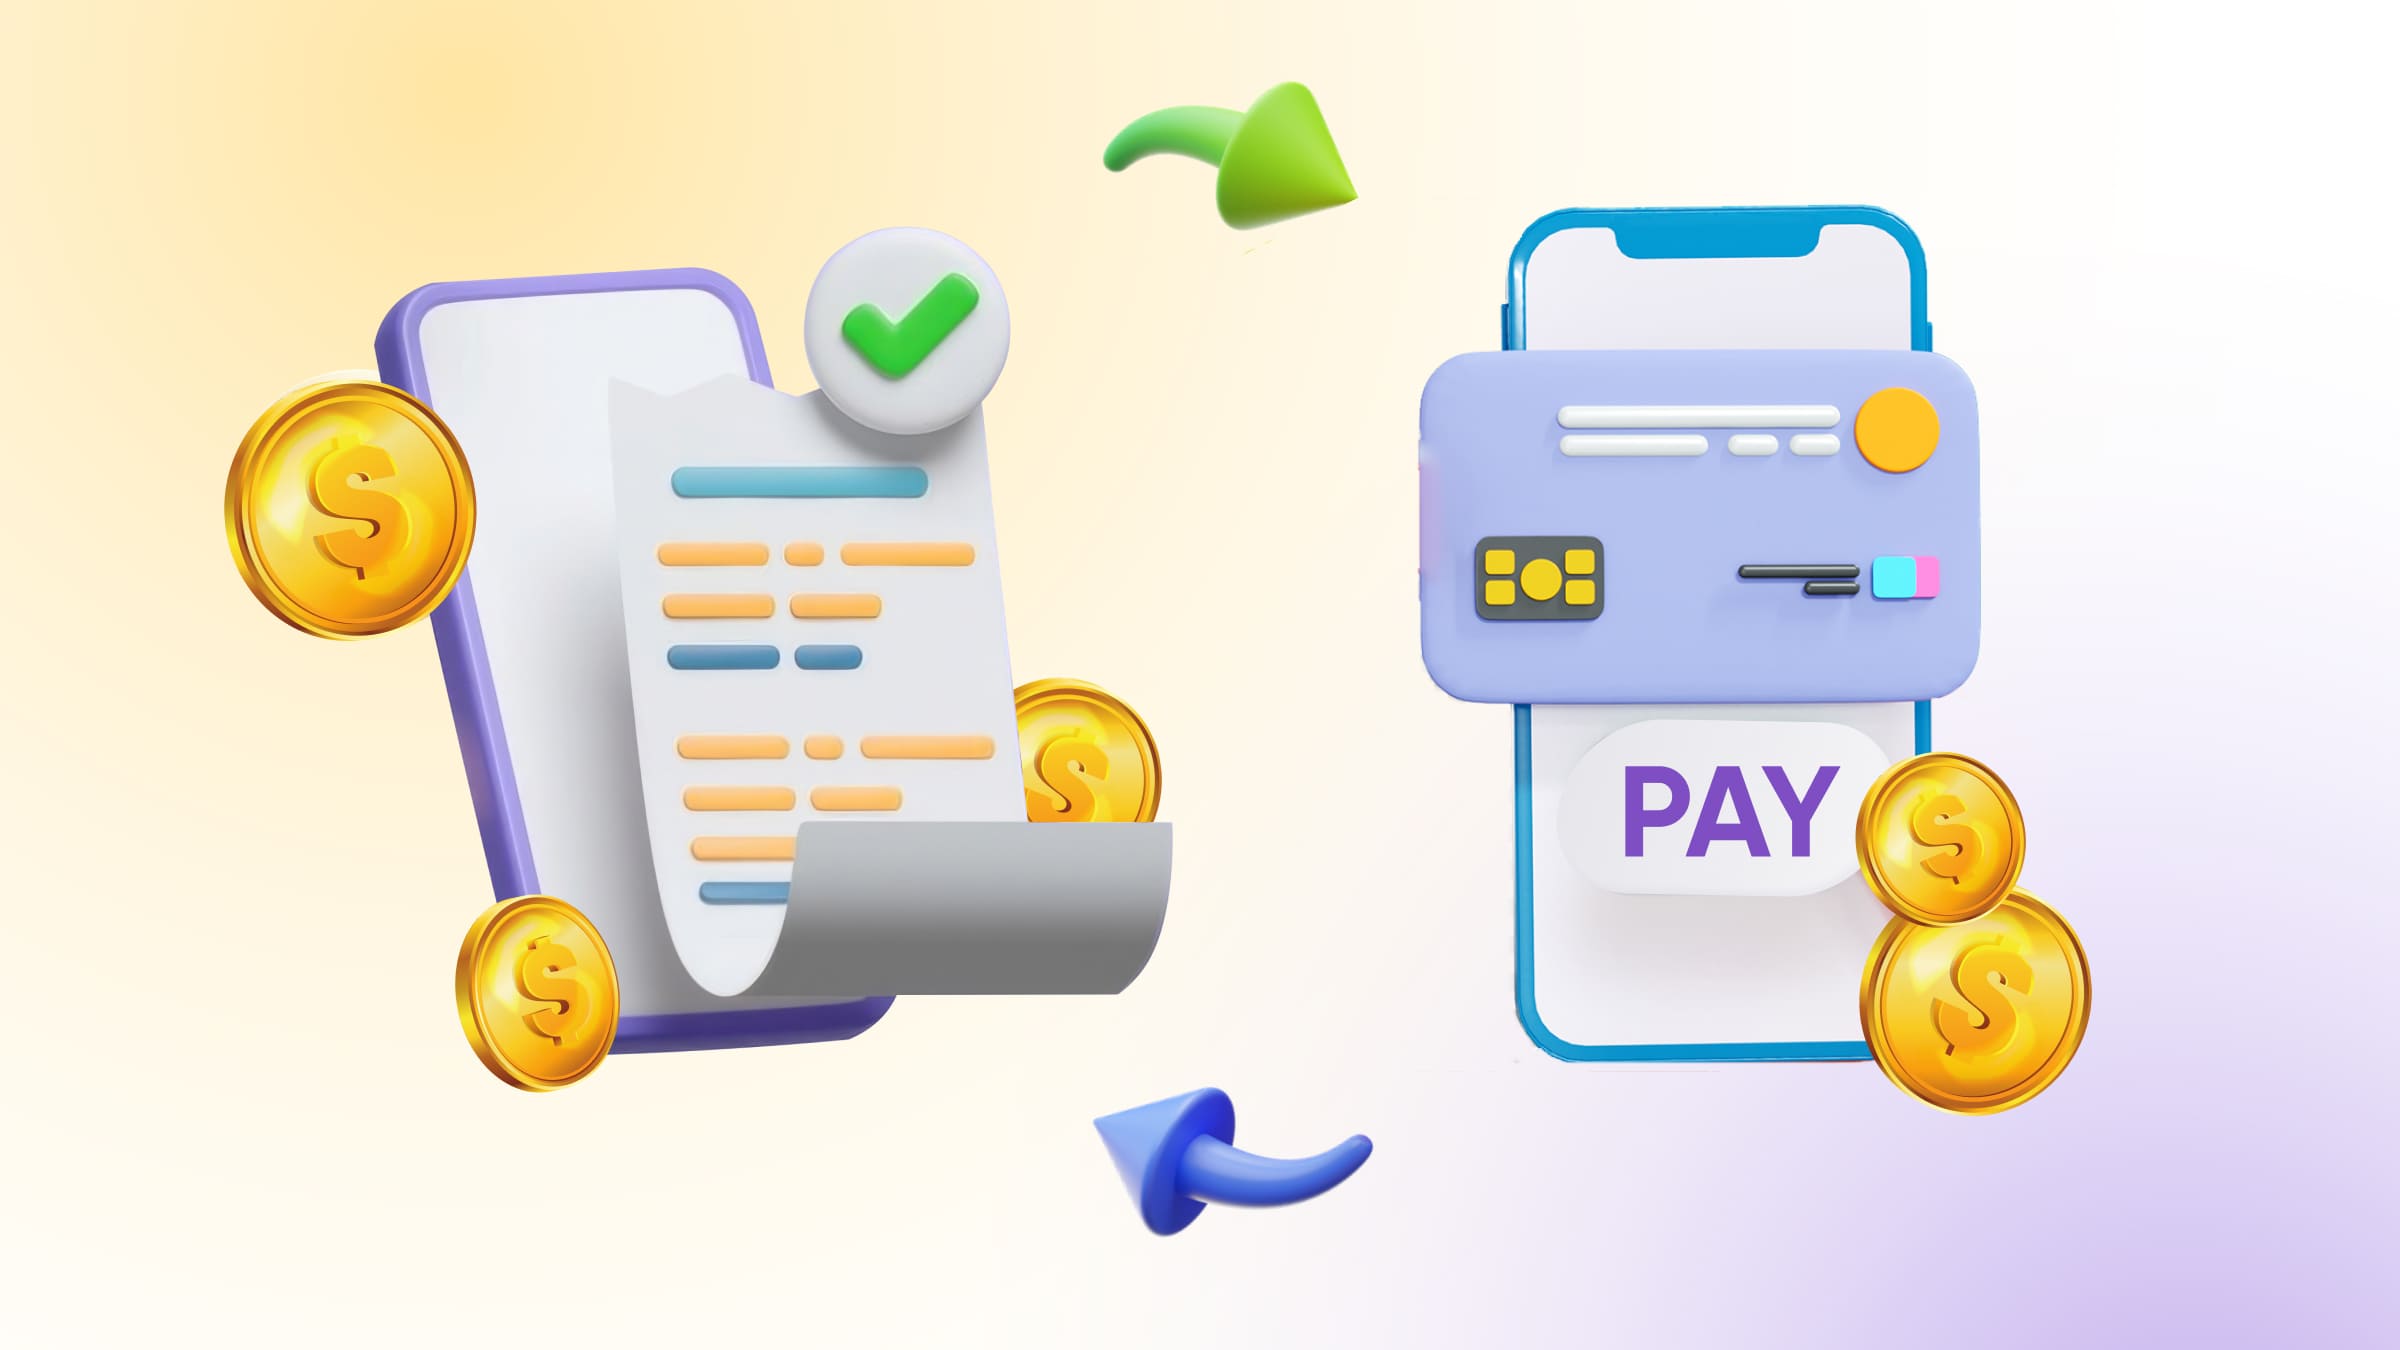 You can accept payment in 7 ways, such as transfer to a card or cryptocurrency wallet.